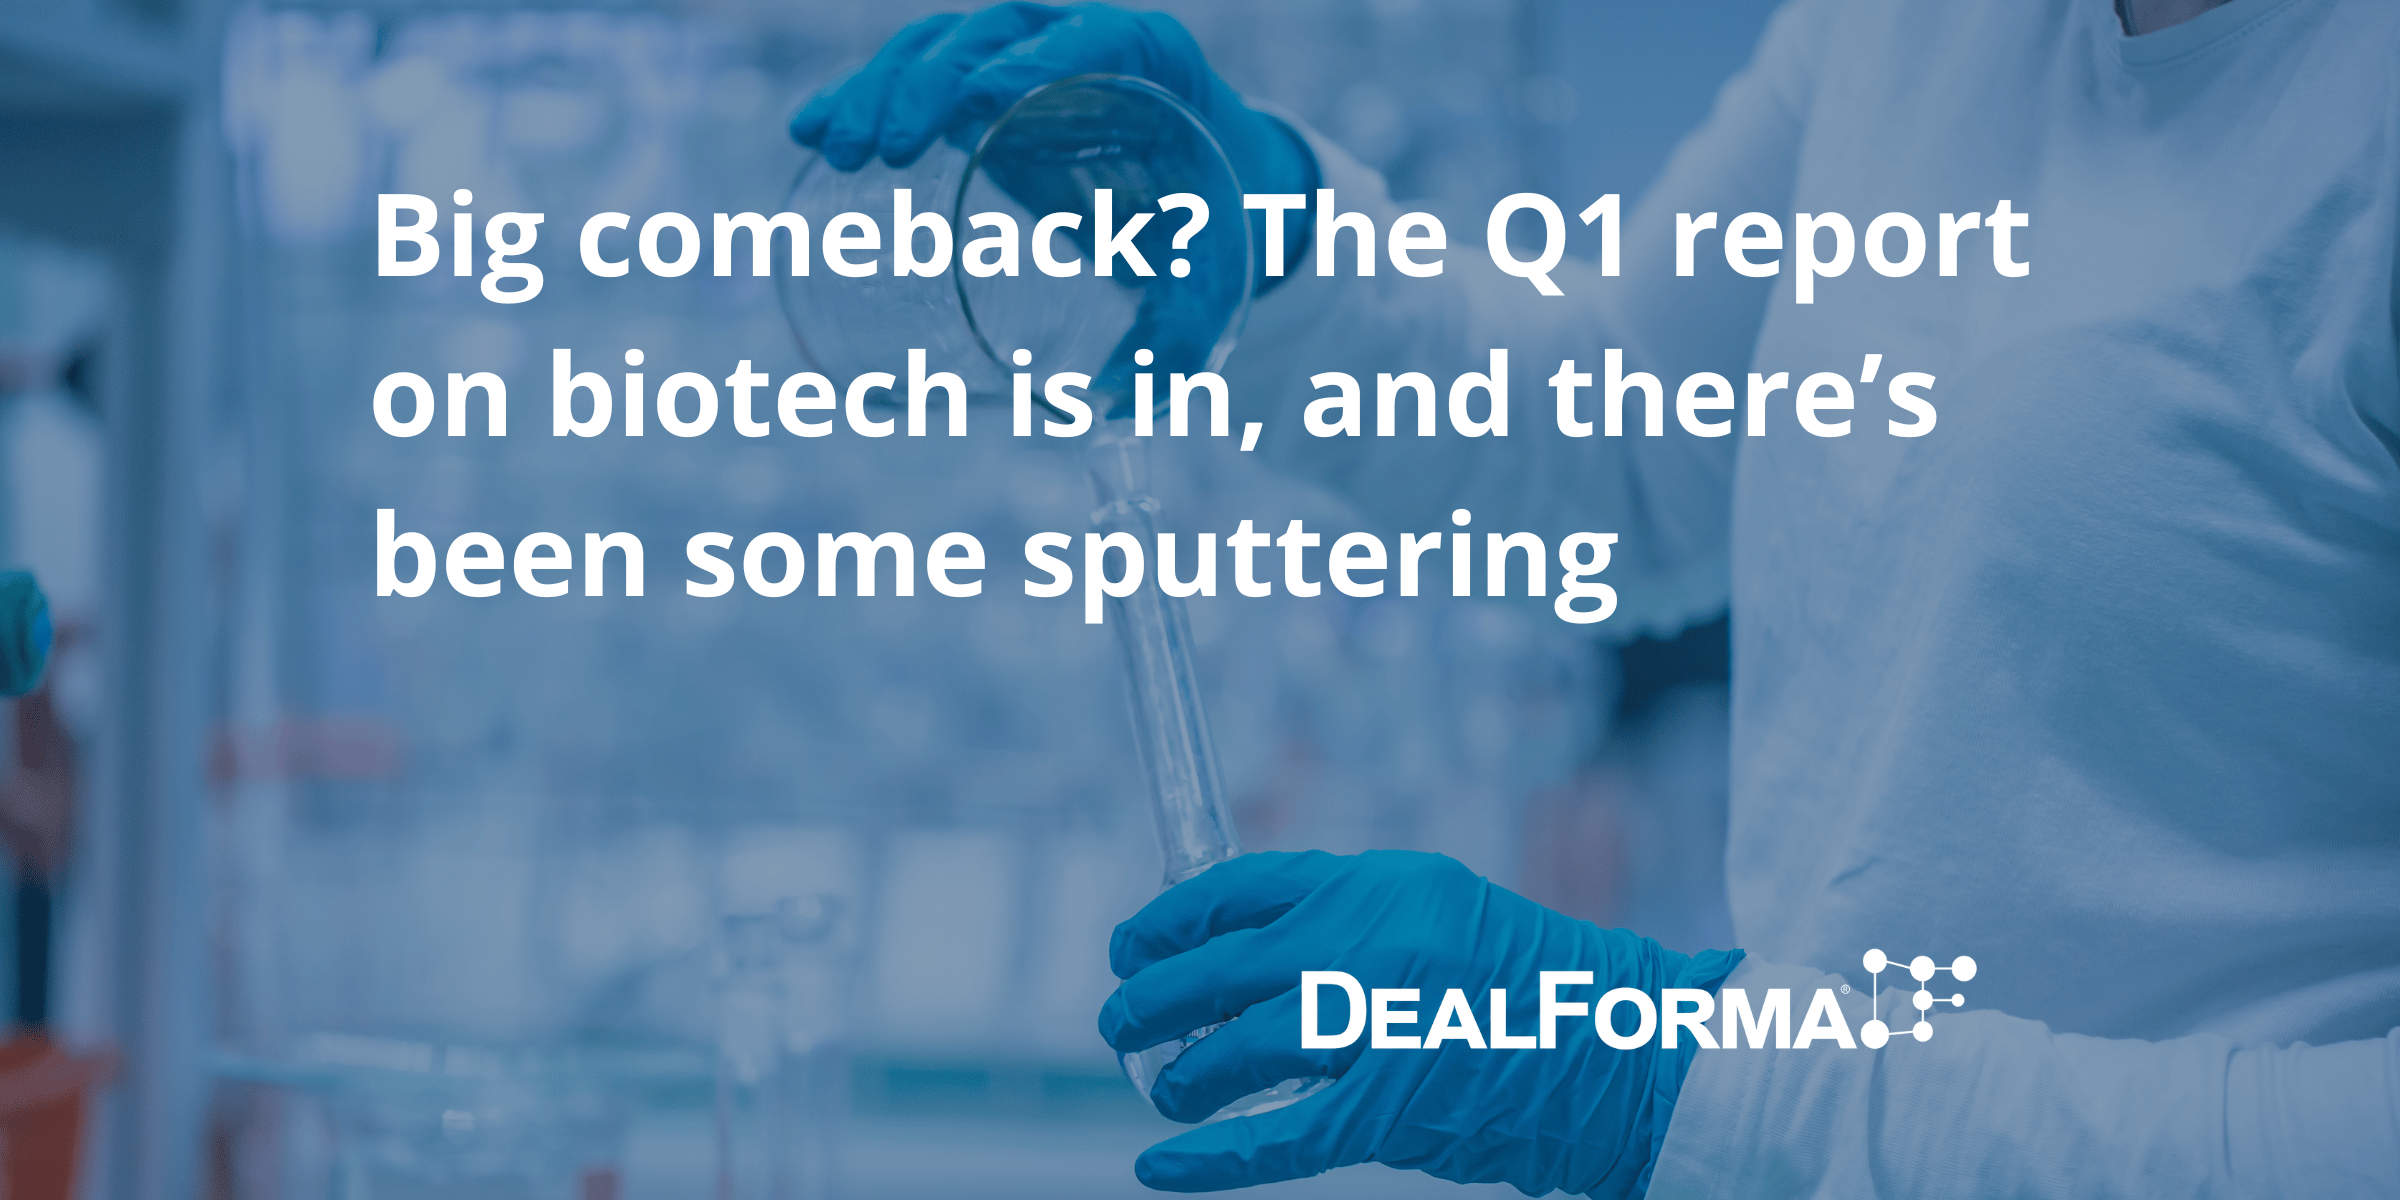 Big comeback. The Q1 report on biotech is in, and there’s been some sputtering